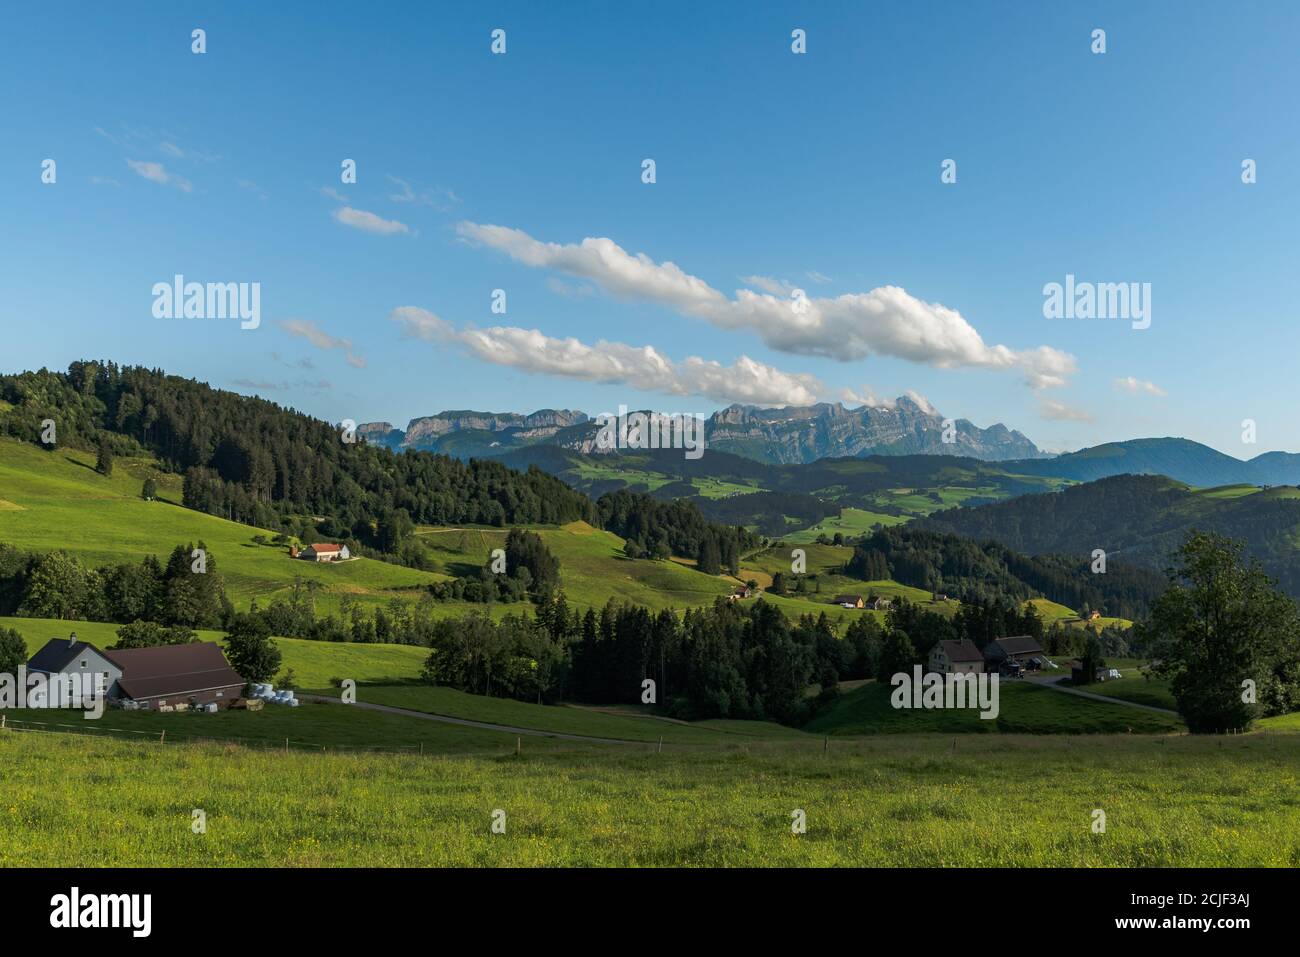 The Appenzellerland with alpine pastures and farmhouses, view of the Alpstein mountains with Saentis, Canton of Appenzell Inner-Rhodes, Switzerland Stock Photo